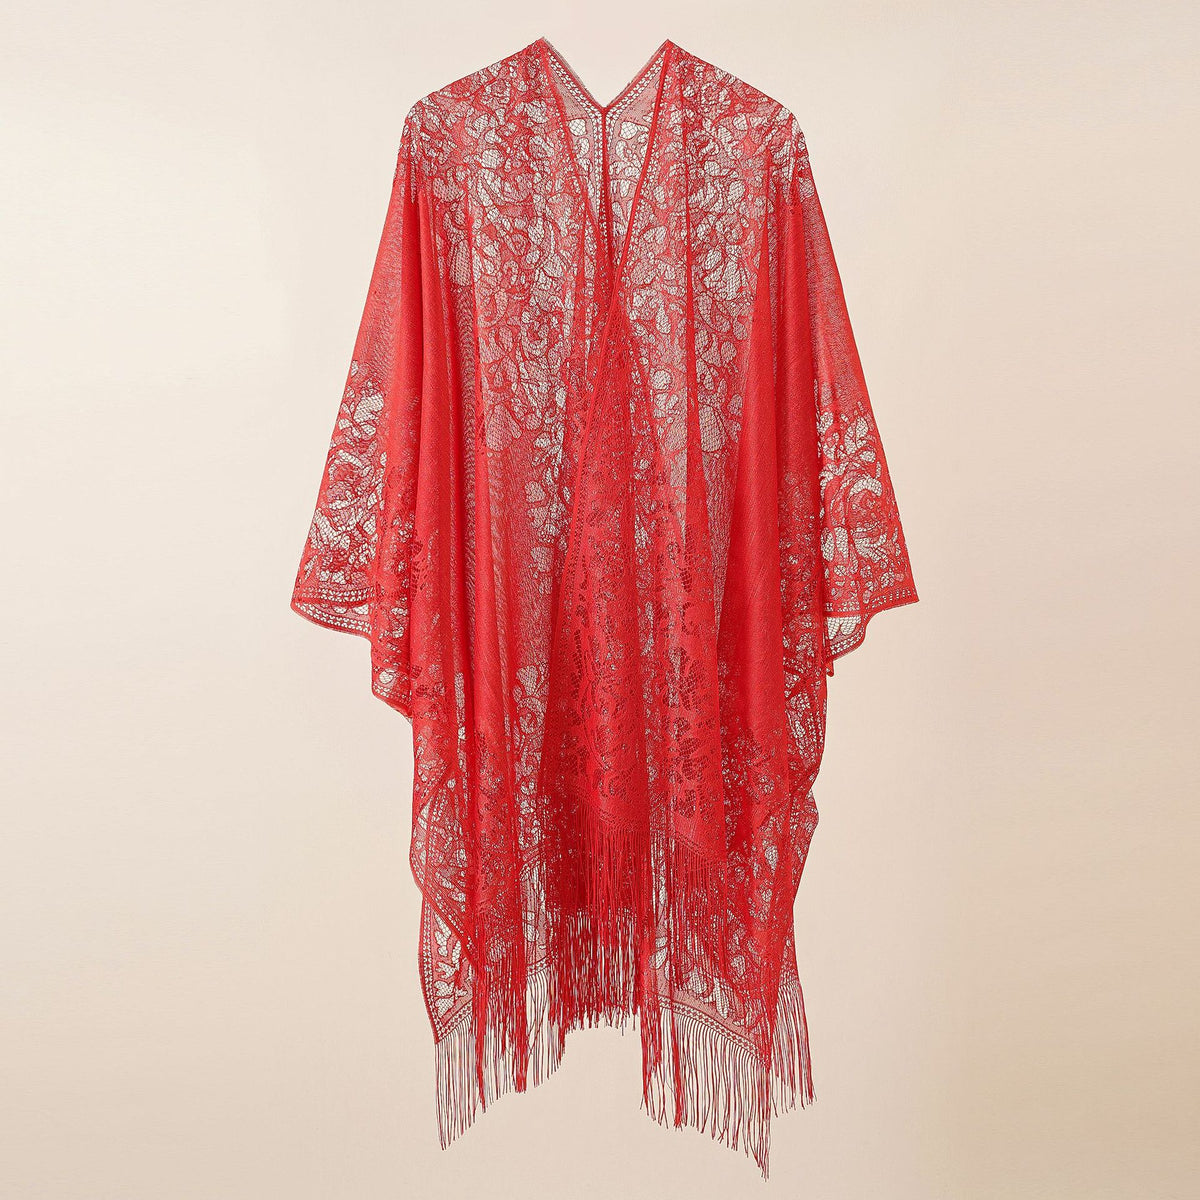 Lace Large Sun Protection Beach Cover Up